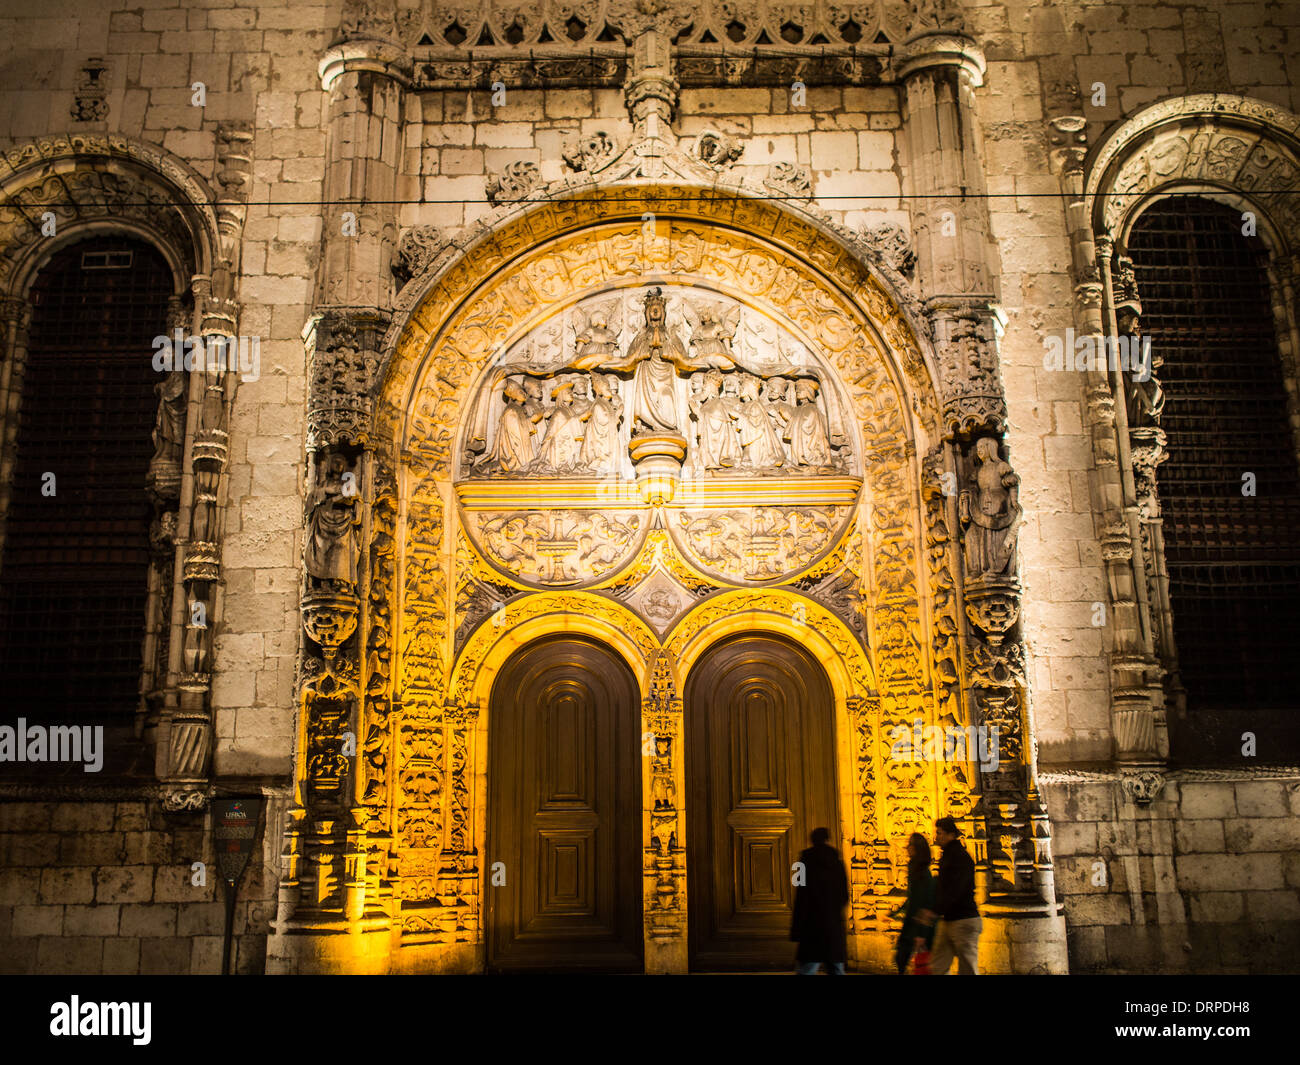 Night lights over Our Lady of Conception the Old church facade in Manueline style, Lisbon Stock Photo